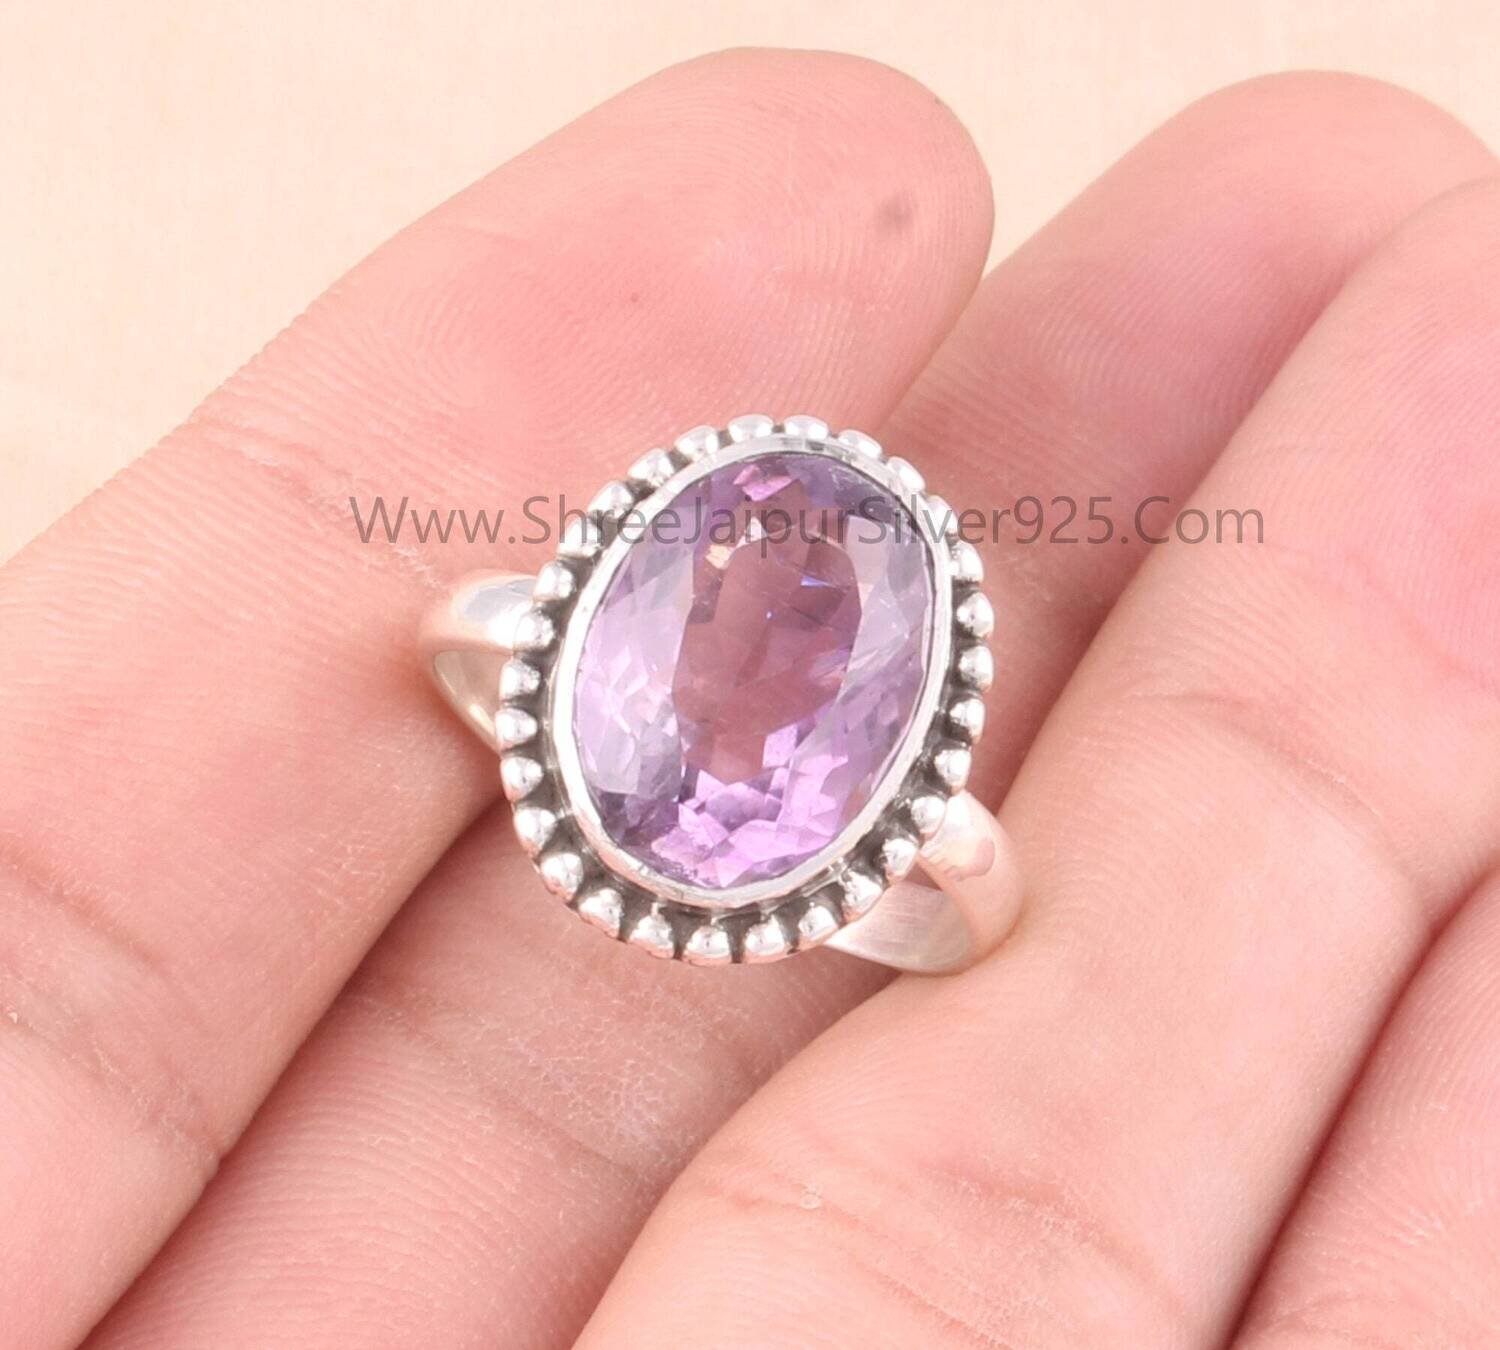 Natural Amethyst Oval Cut Stone Solid 925 Sterling Silver Ring For Women, Handmade Silver Designer Ring For Wedding Anniversary Gifts Idea